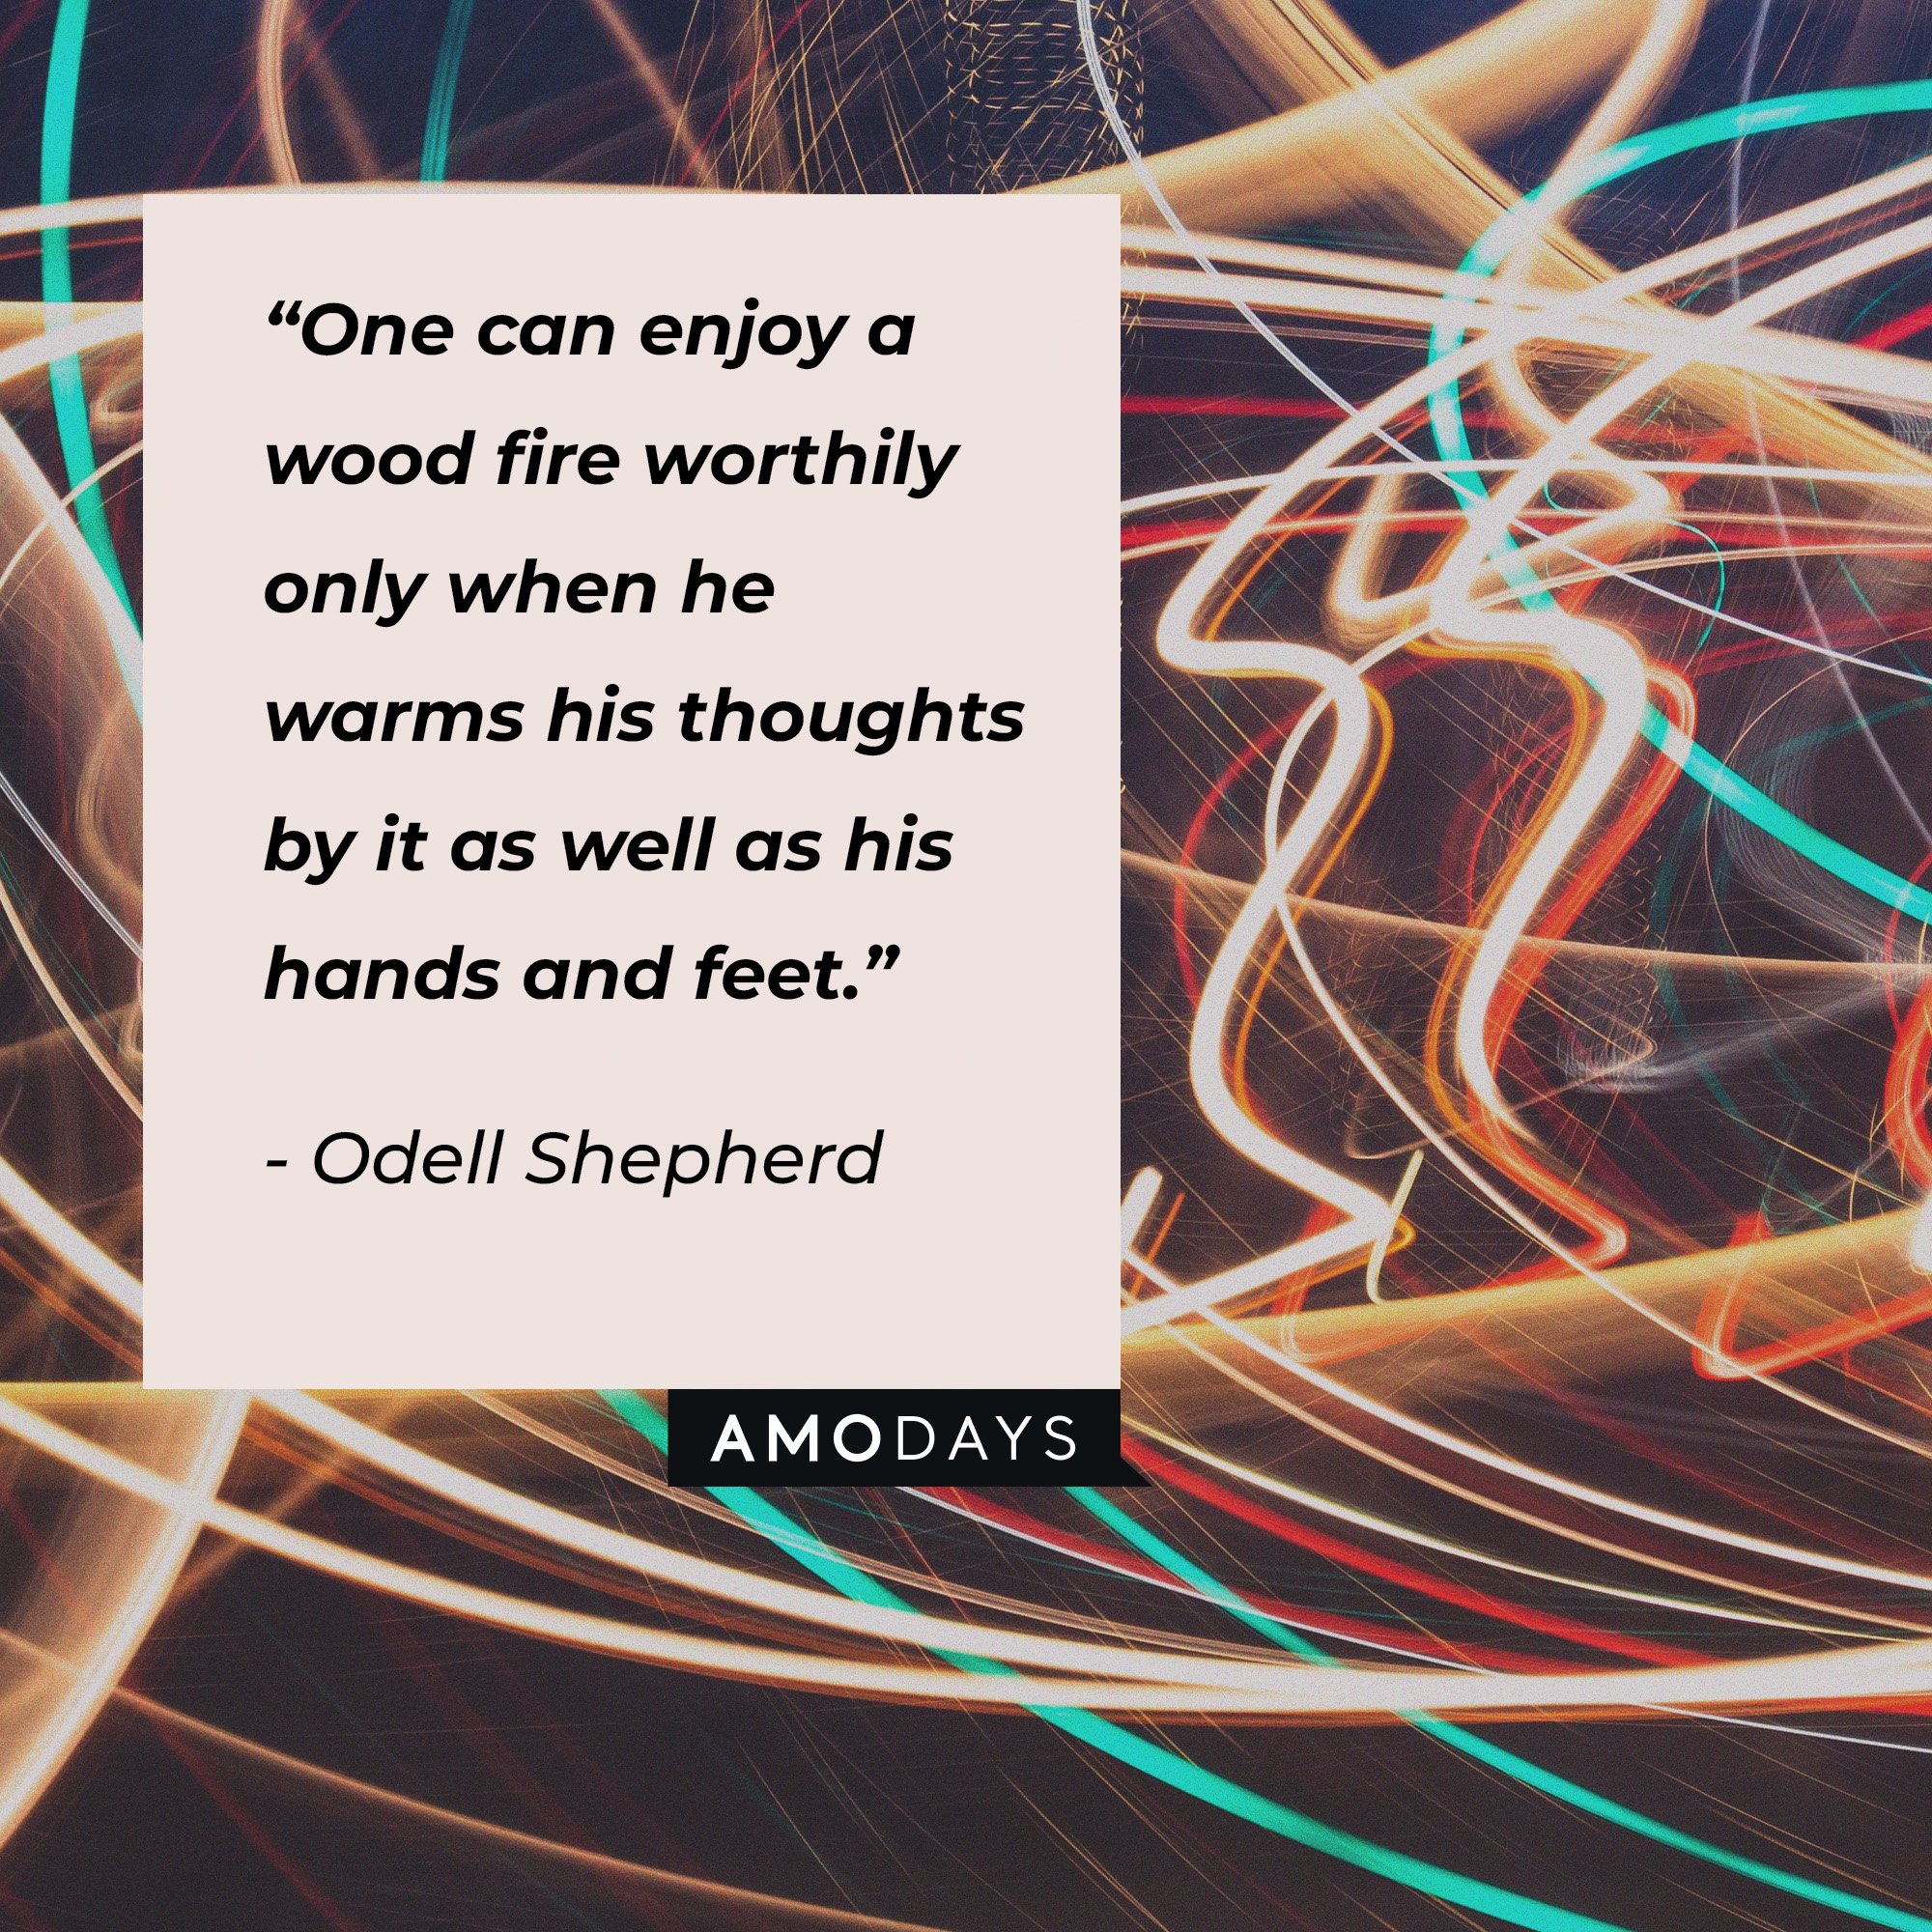  Odell Shepherd's quote: “One can enjoy a wood fire worthily only when he warms his thoughts by it as well as his hands and feet.” | Image: AmoDays